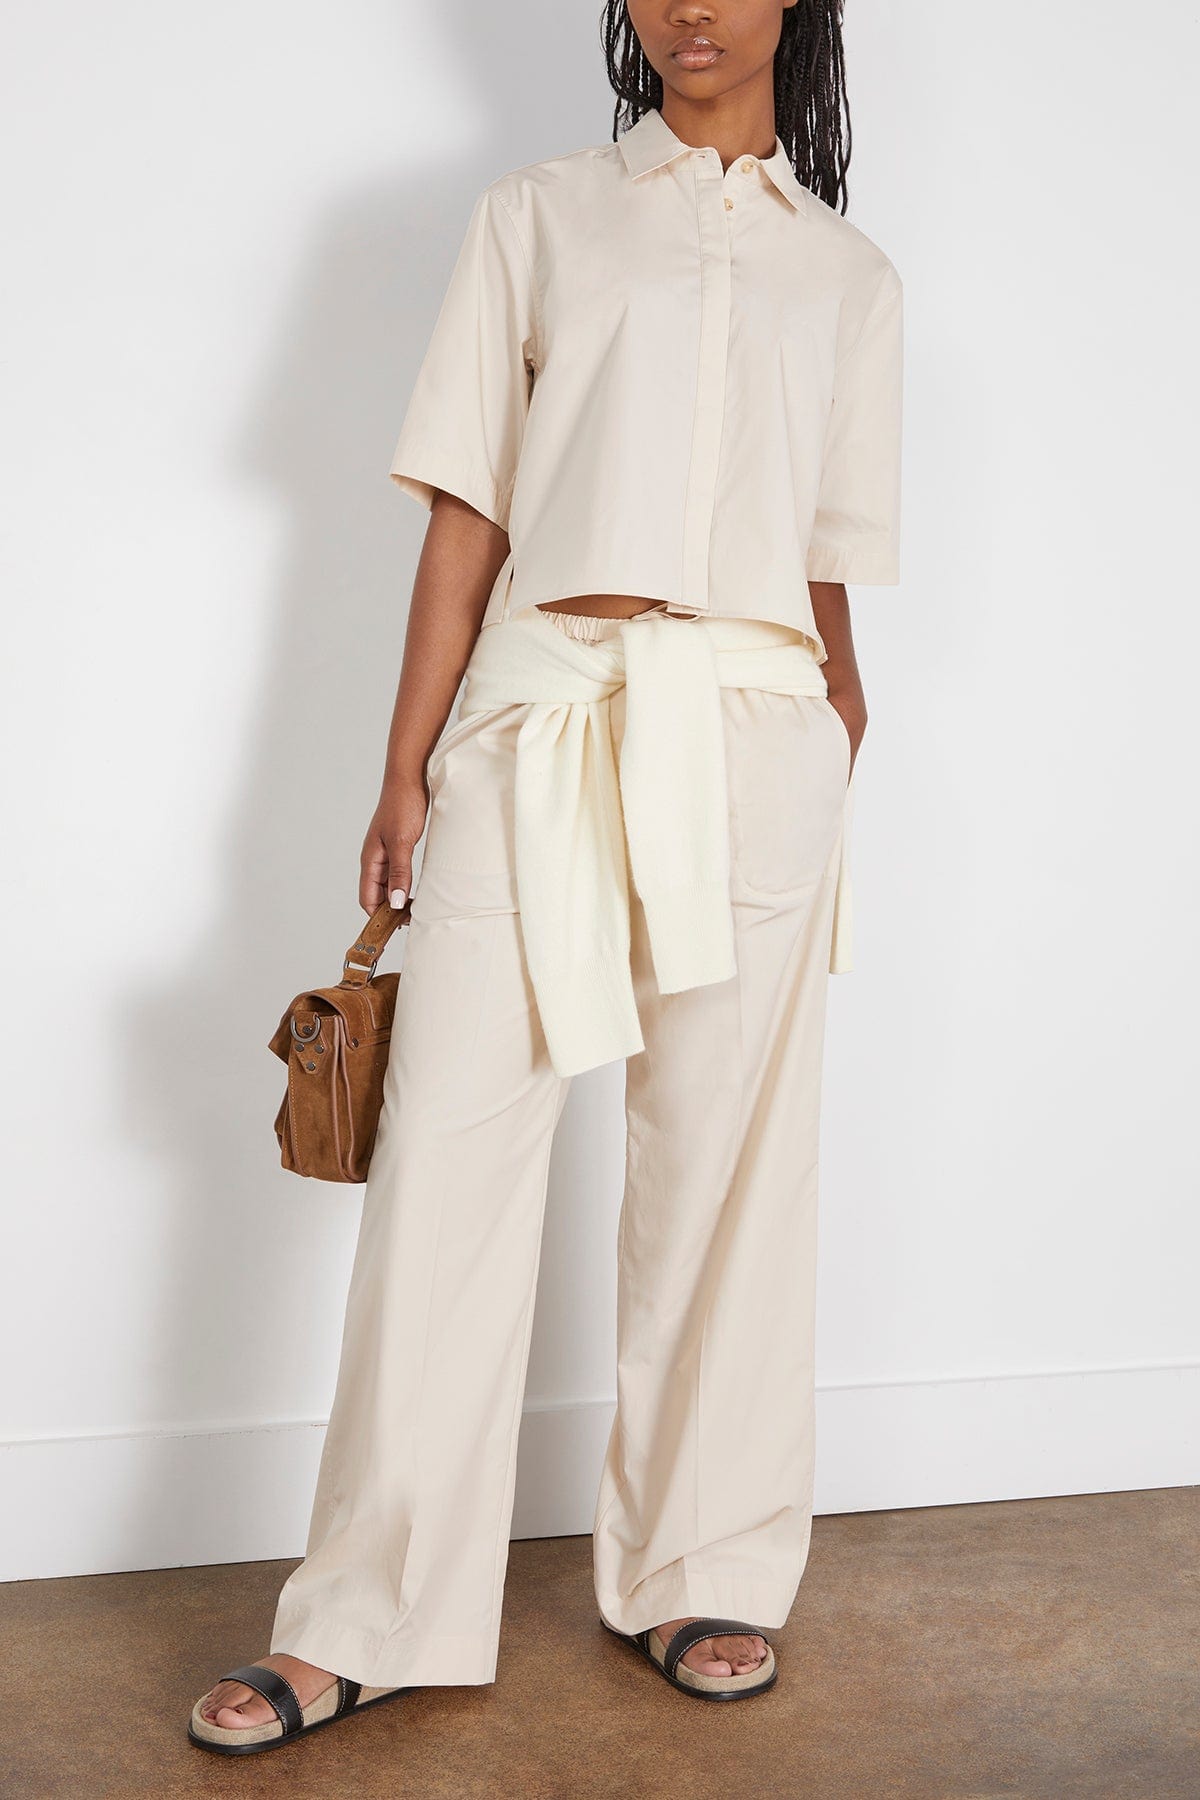 Toteme Tops Cropped Cotton-Poplin Shirt in Stone Toteme Cropped Cotton-Poplin Shirt in Stone